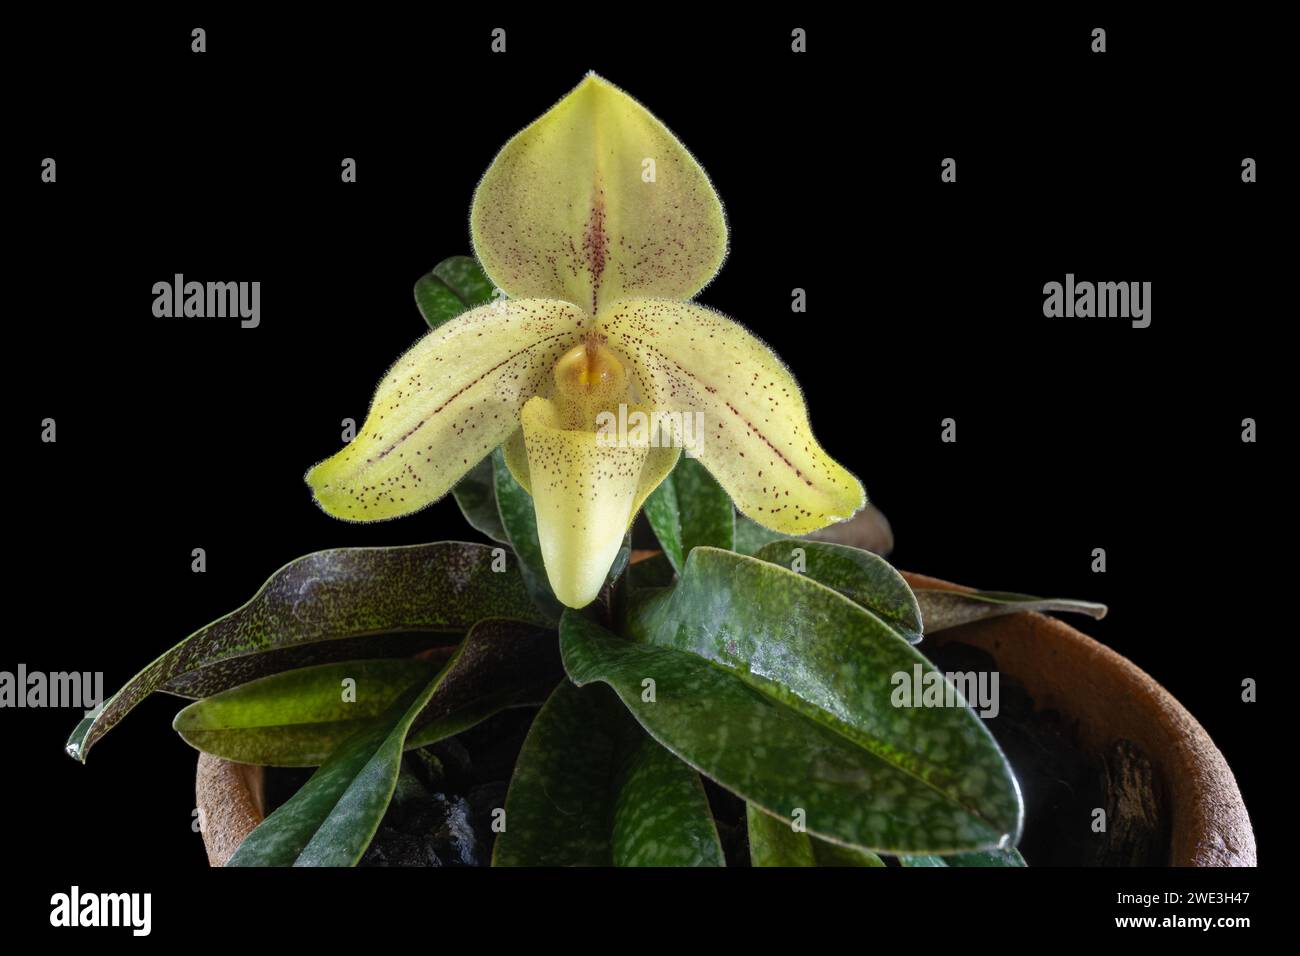 Closeup view of lady slipper orchid species paphiopedilum concolor striatum with beautiful yellow and red flower isolated on black background Stock Photo